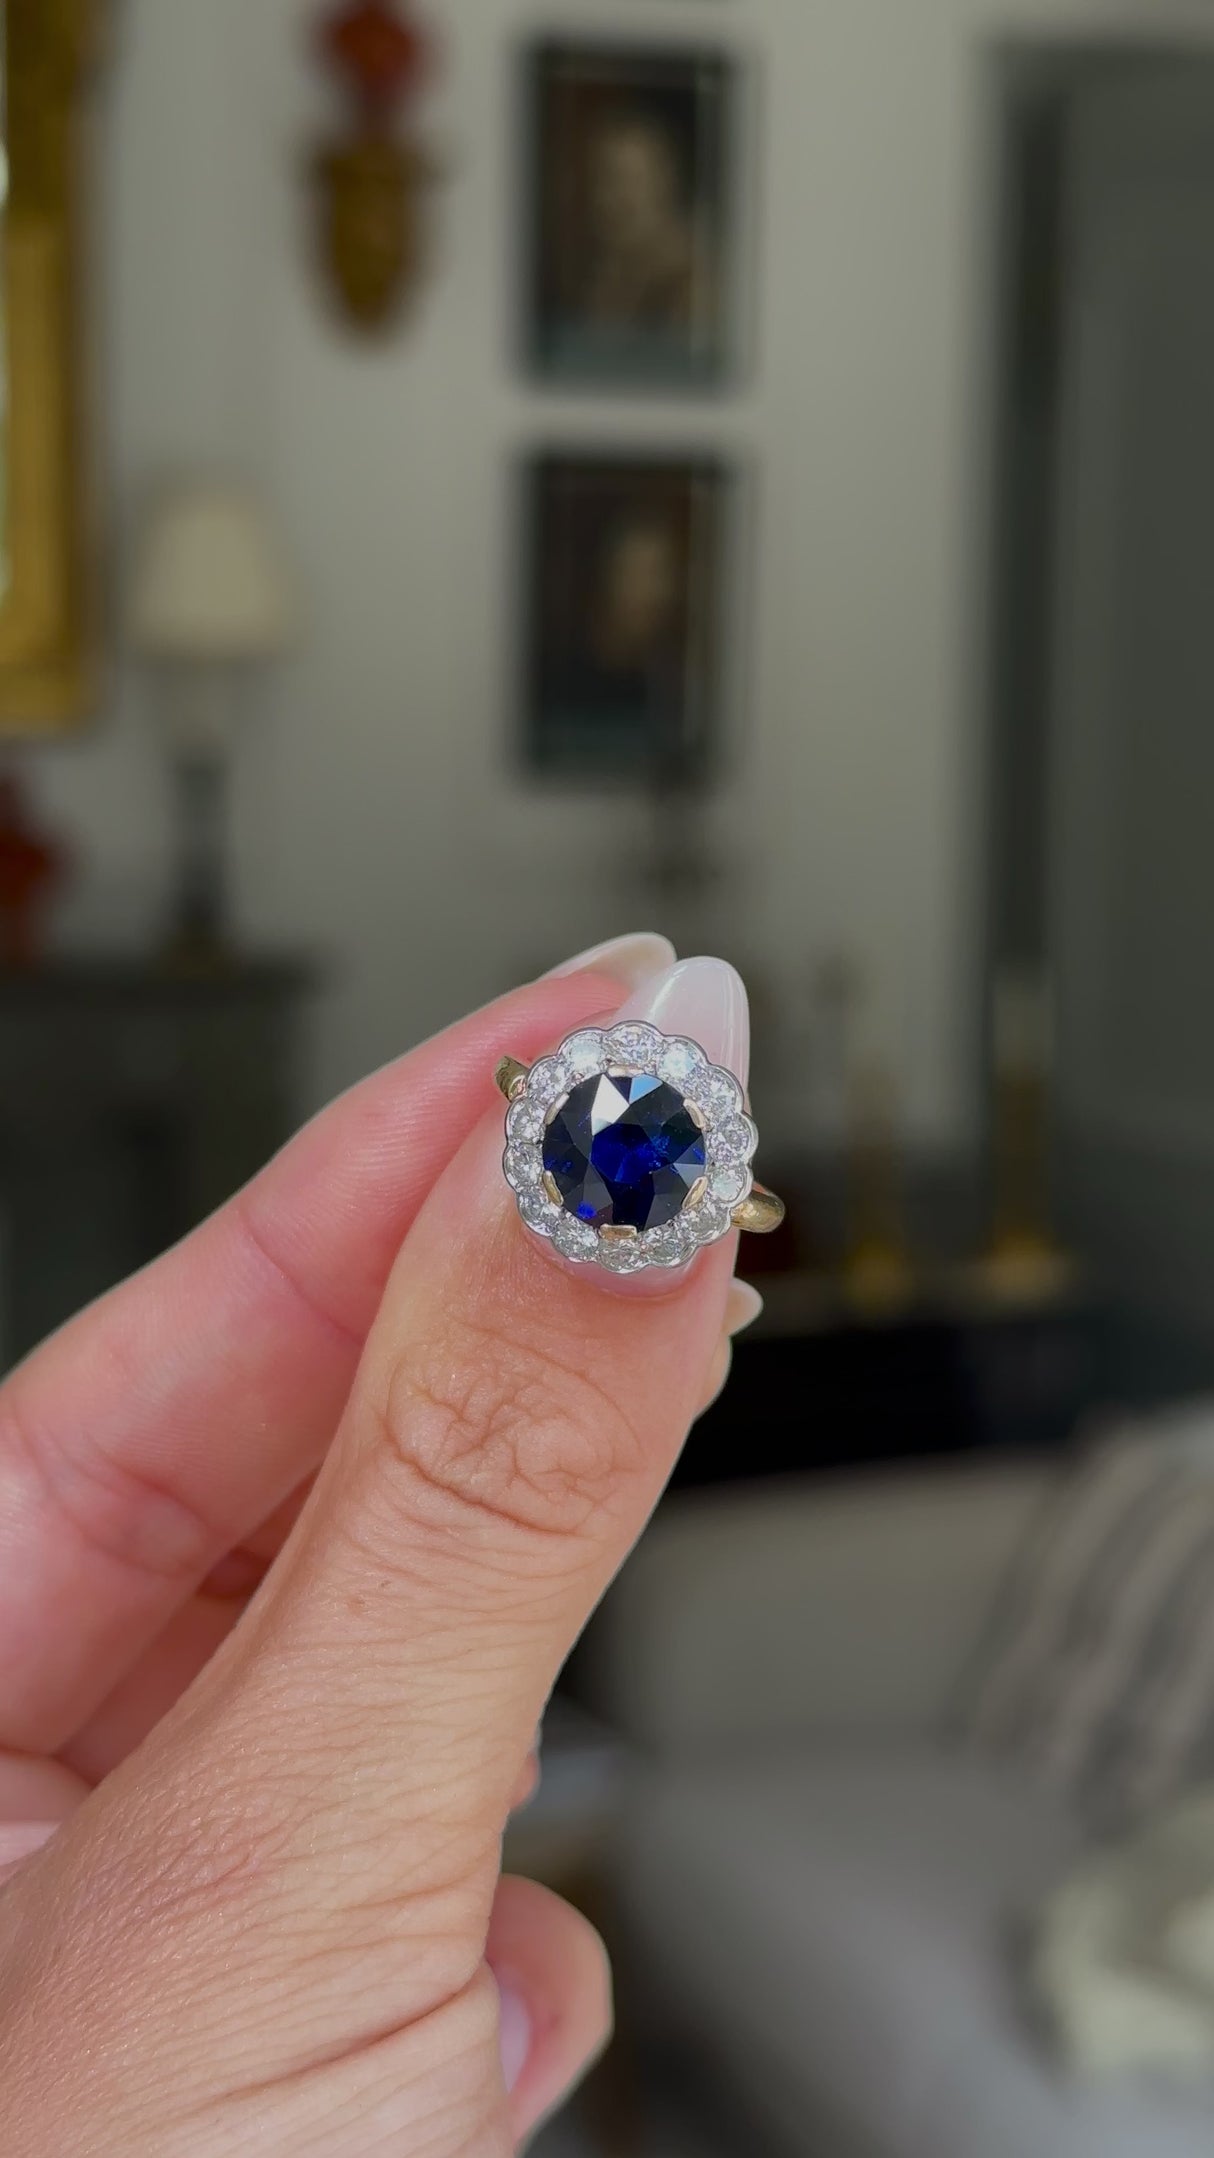 belle epoque sapphire and diamond cluster ring, held in fingers and rotated to give perspective,front view.